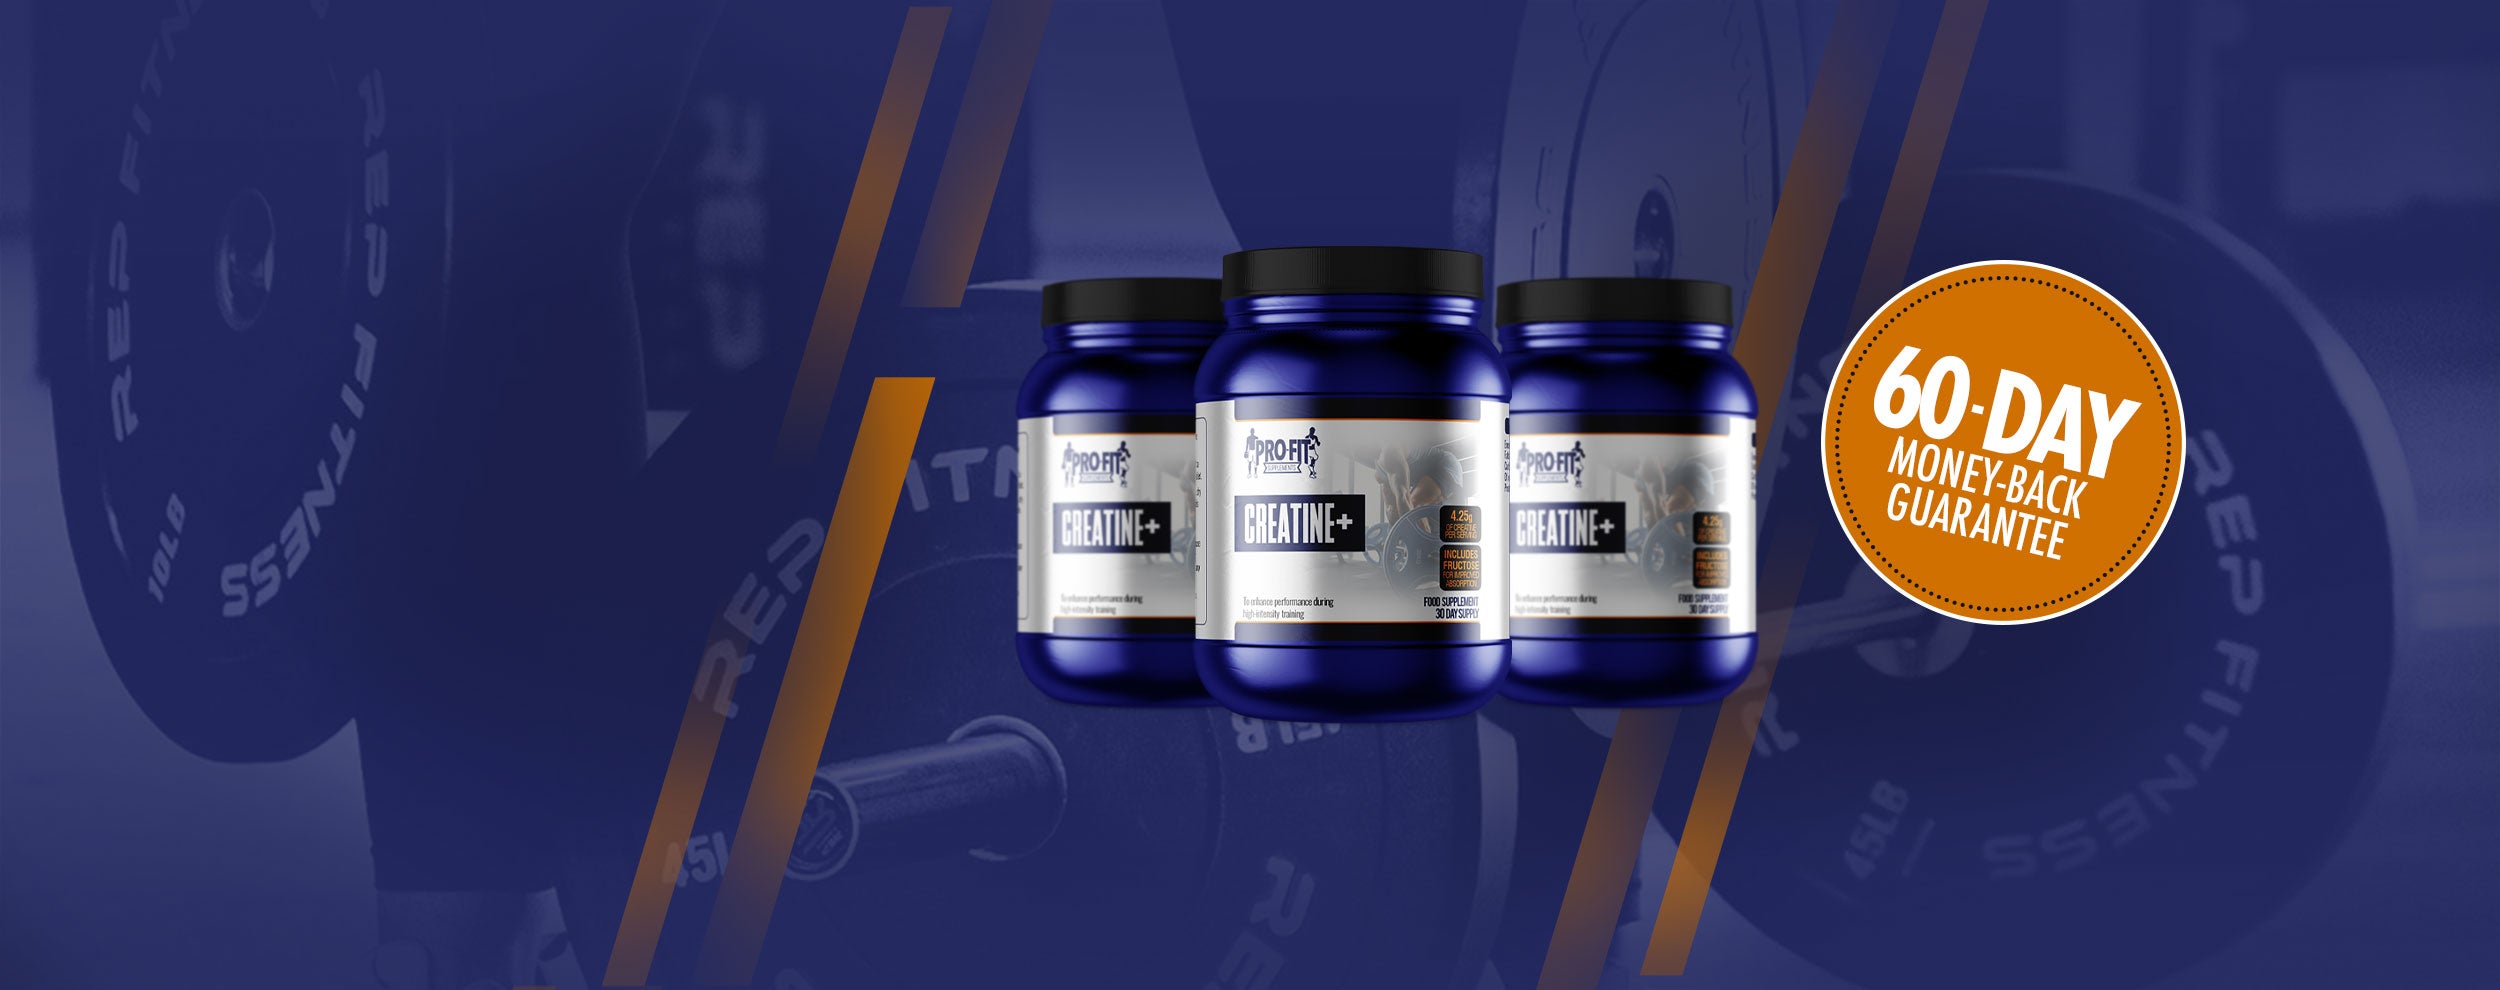 Tubs of creatine with weights in the background, 60 day money back guarantee sticker